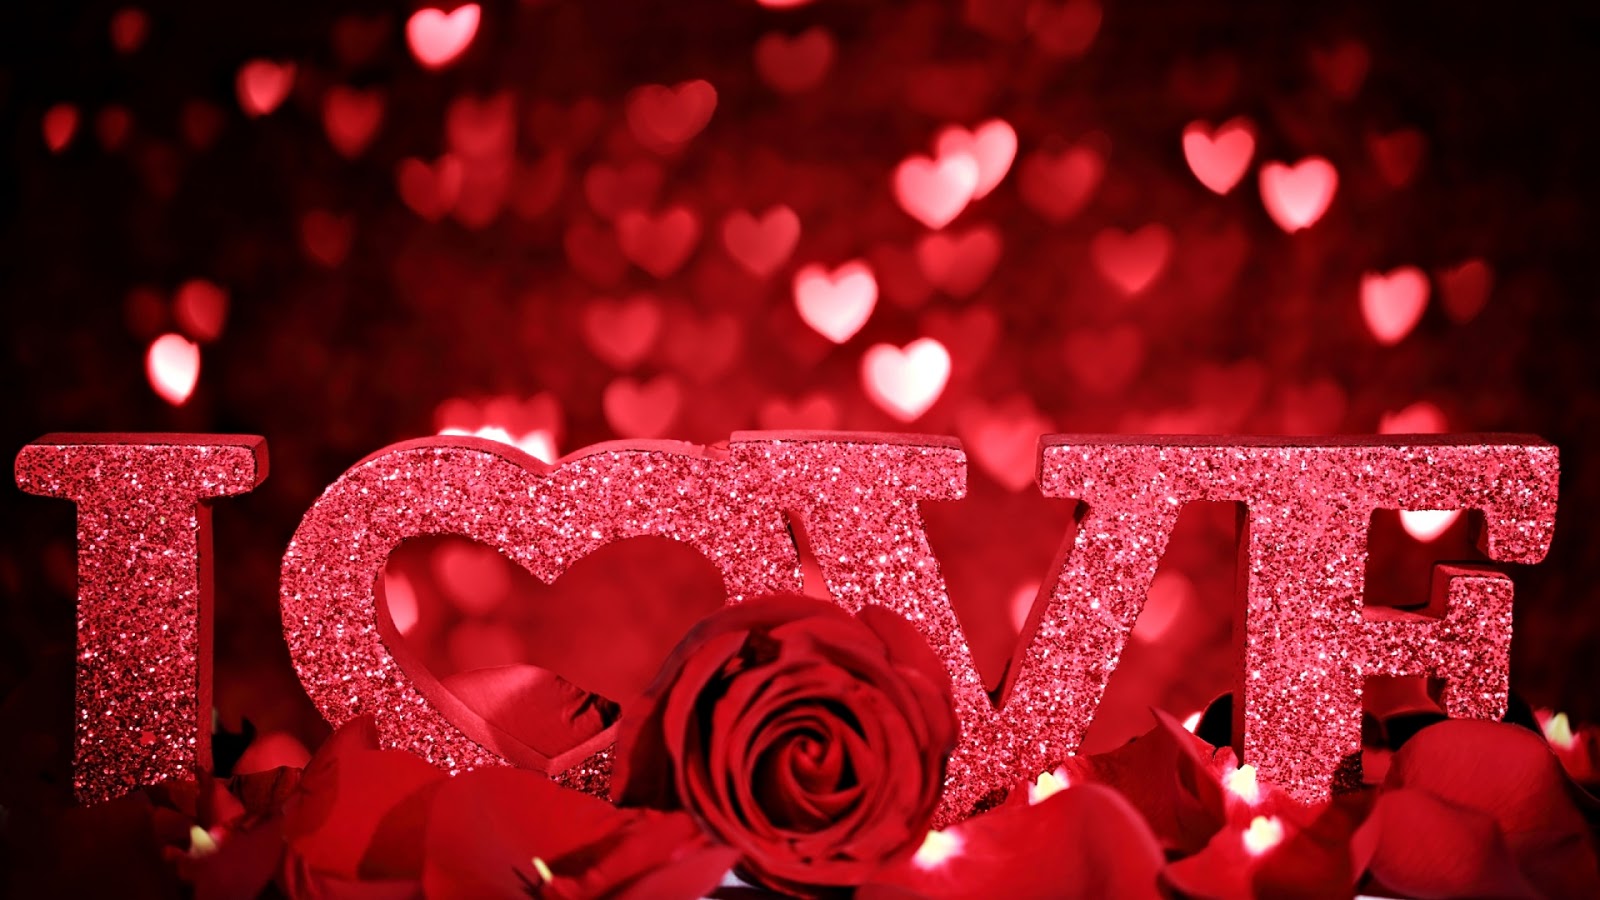 Love You Heart Image And Desktop Wallpaper Pictures Happy